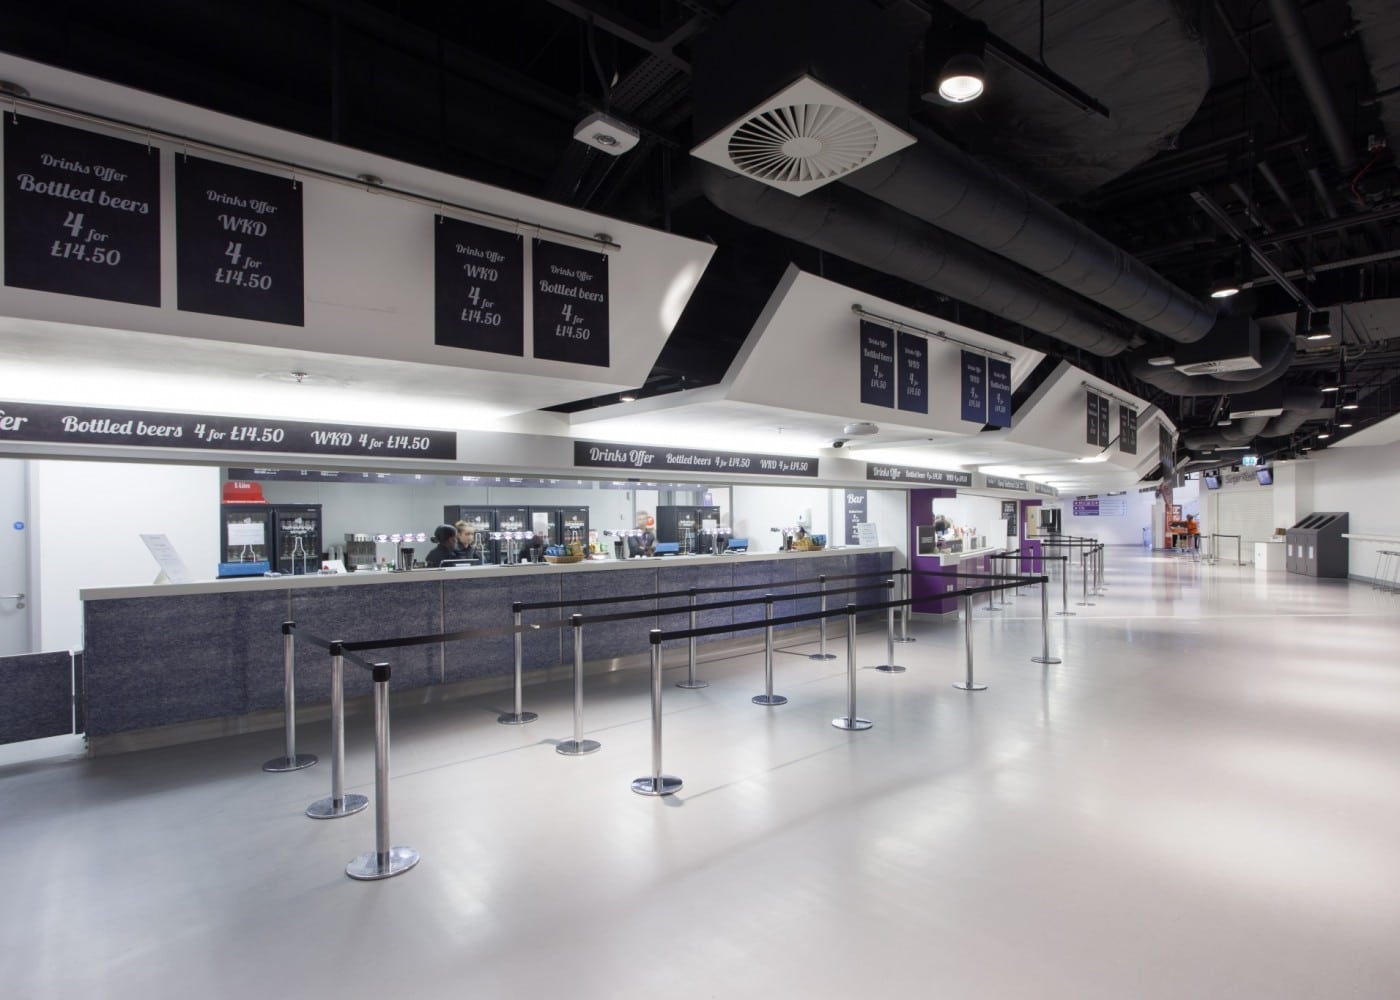 commercial lighting design: Barclaycard Arena food service area